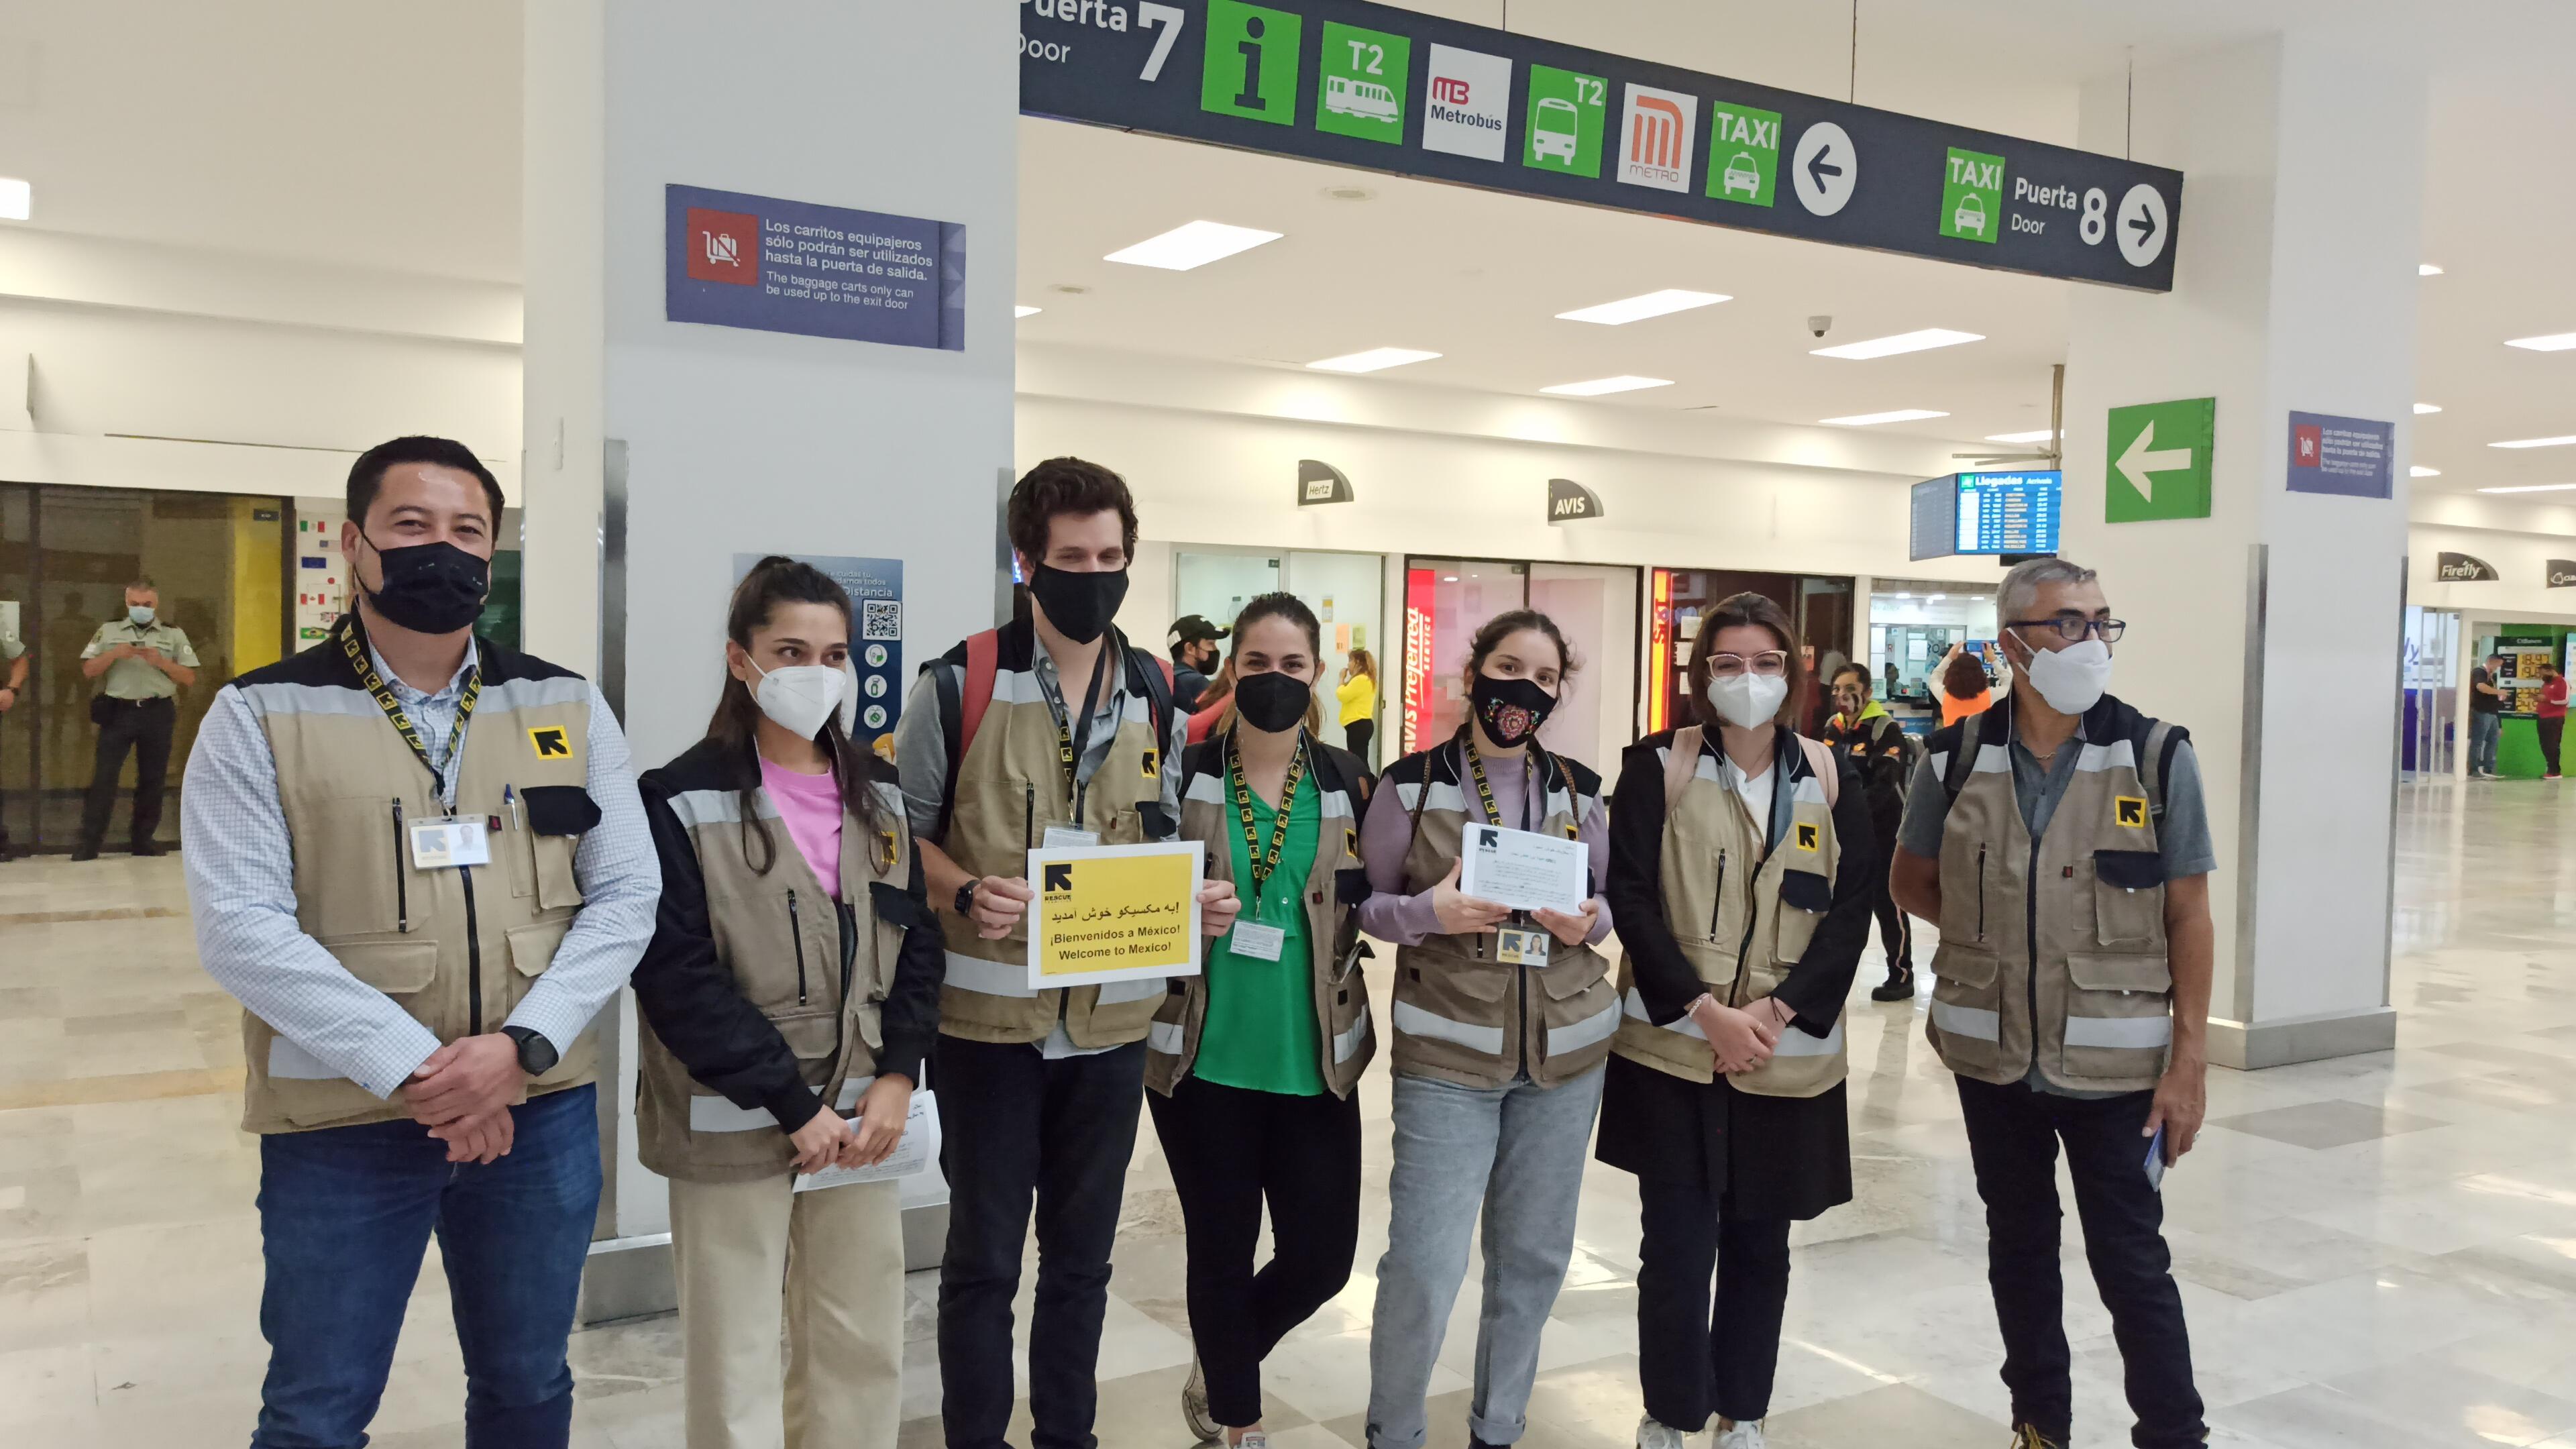 IRC staff members, all wearing masks and IRC-branded vests, stand in a line in an airport terminal. Some are holding welcome signs. 